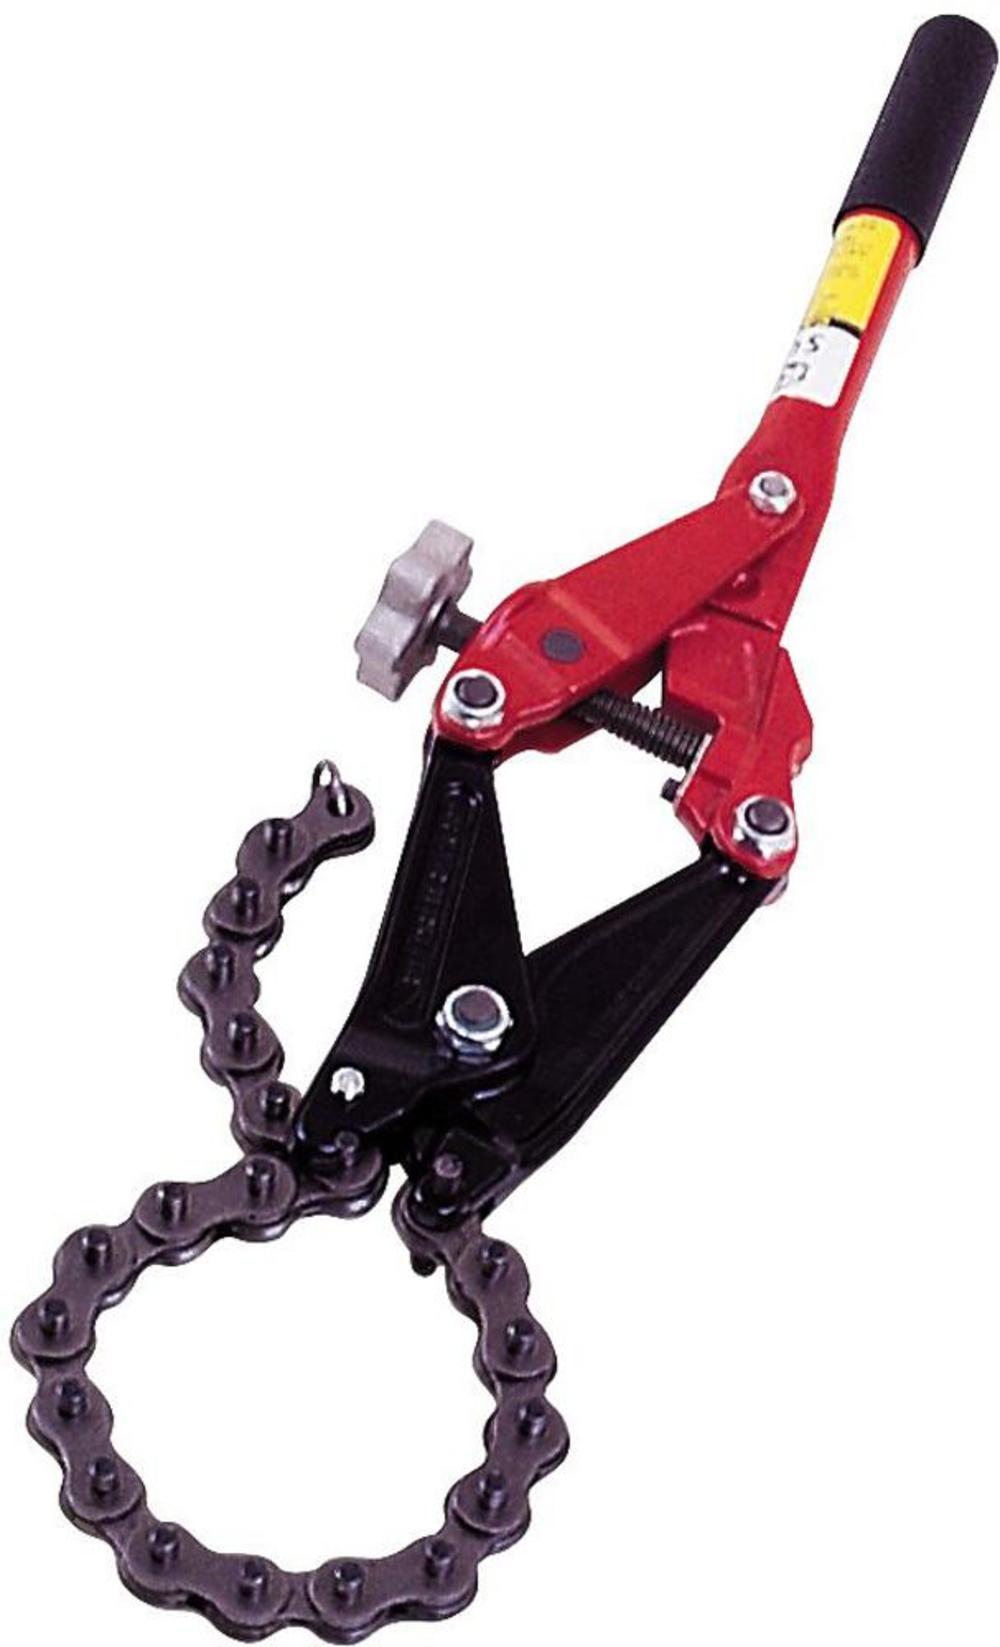 

Reed Mfg Soil Pipe Cutter Ratcheting